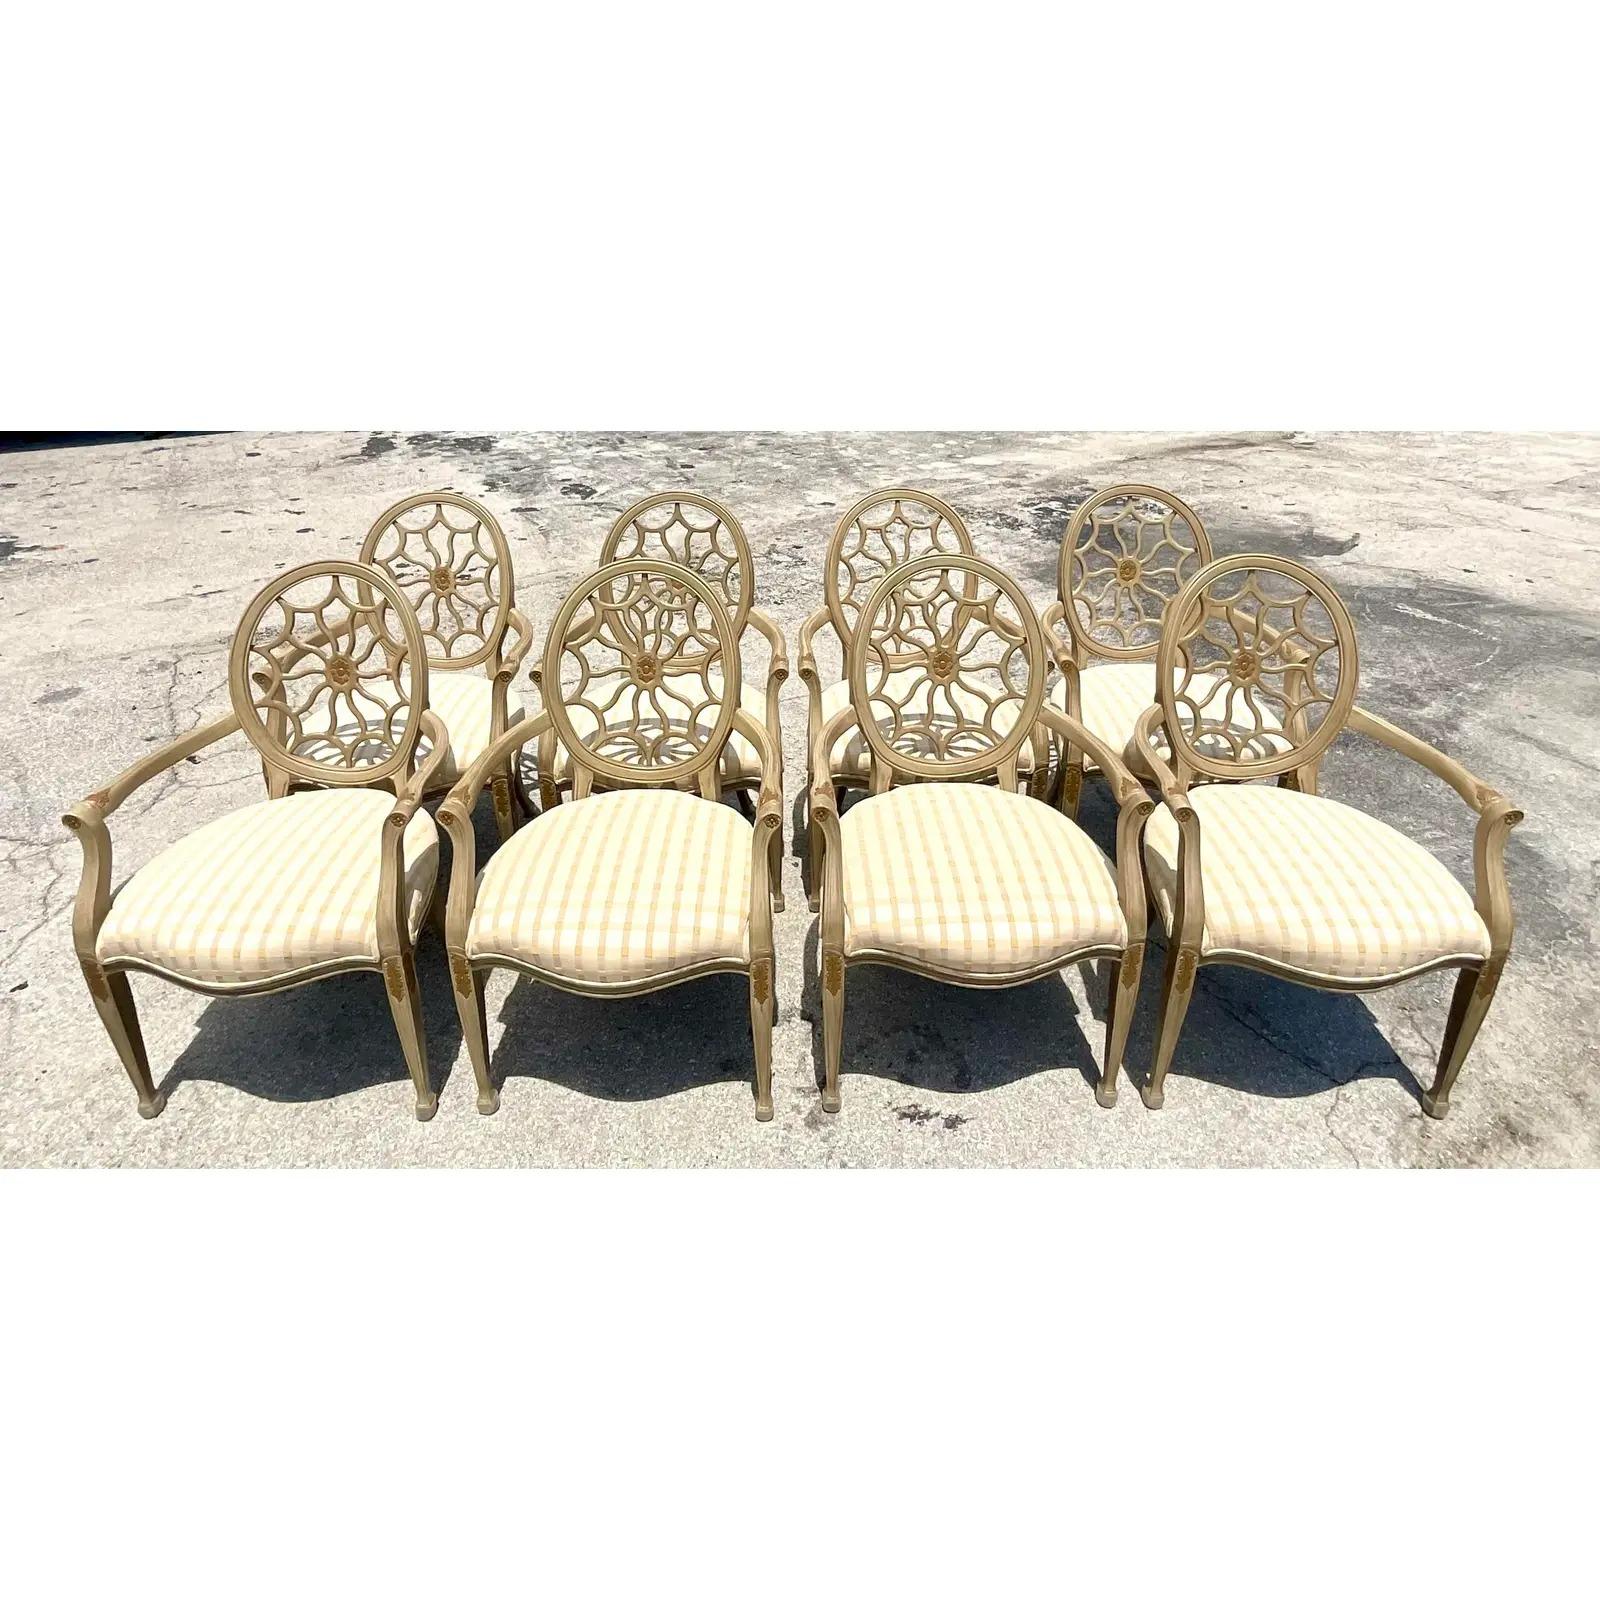 20th Century Vintage Regency Spider Back Dining Chairs, Set of 8